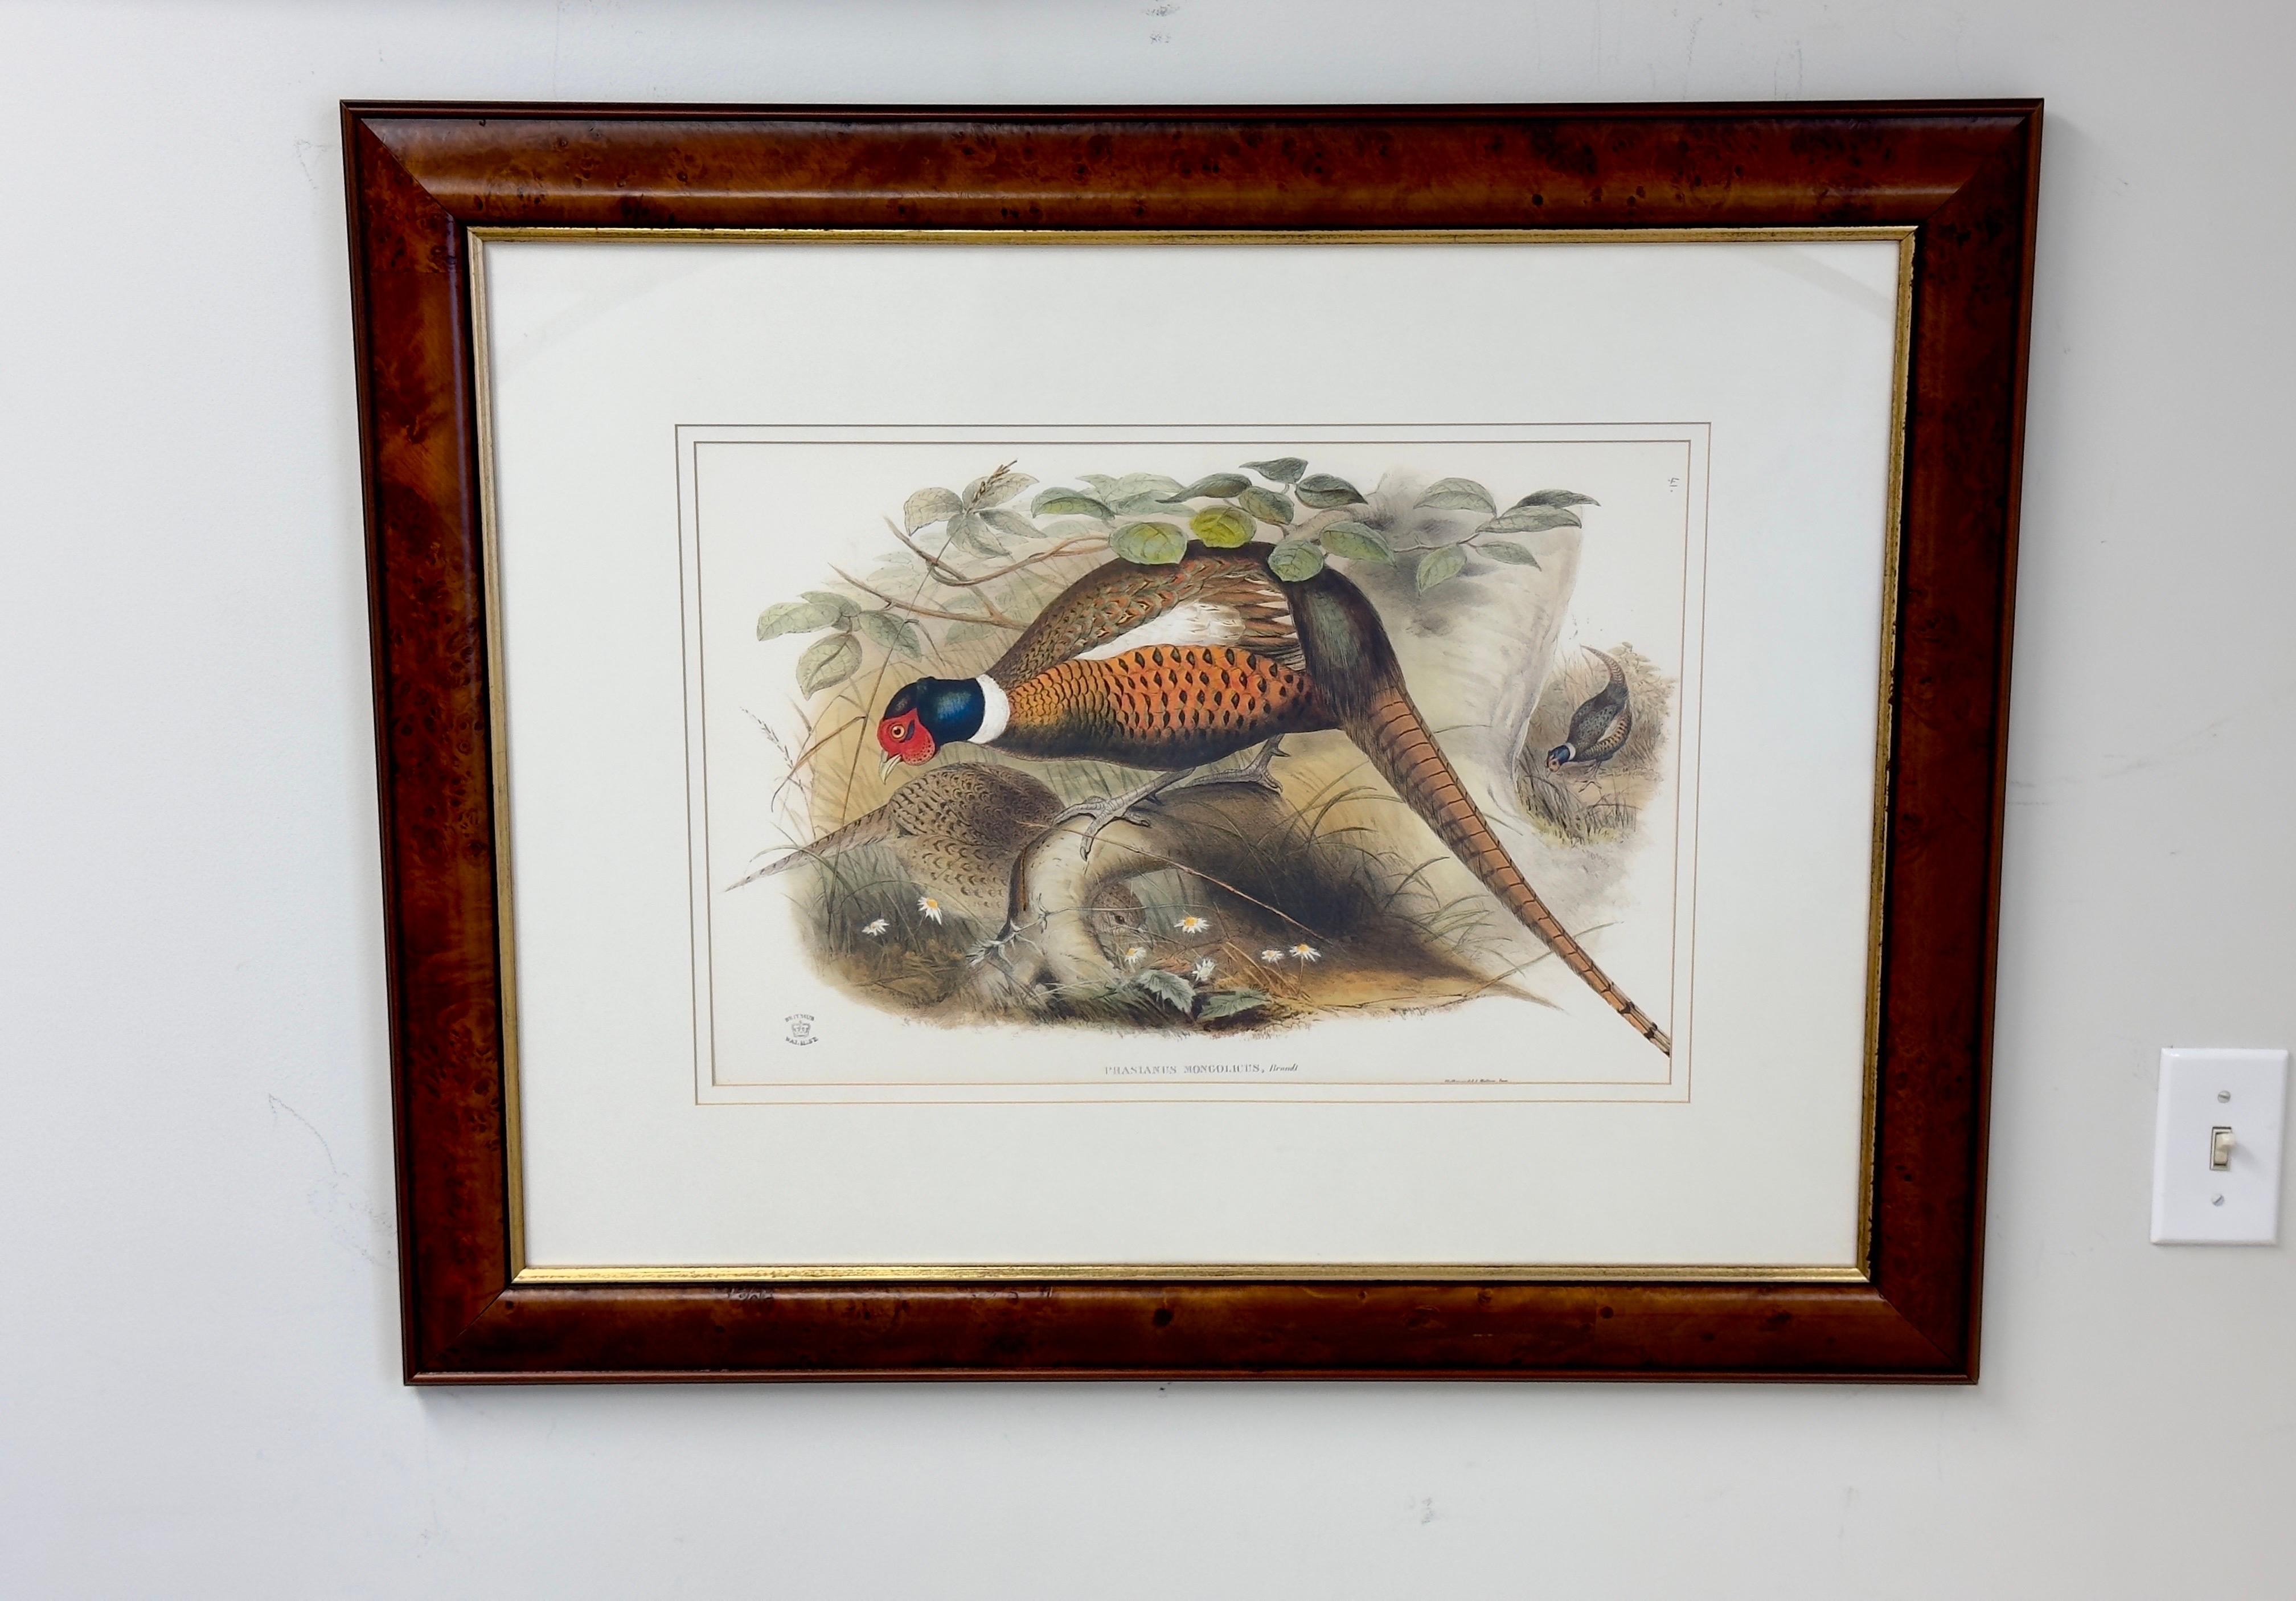  John Gould & Henry Constantine Richter Birds of England Pheasant Print  - Naturalistic Painting by John Gould and Henry Constantine Richter